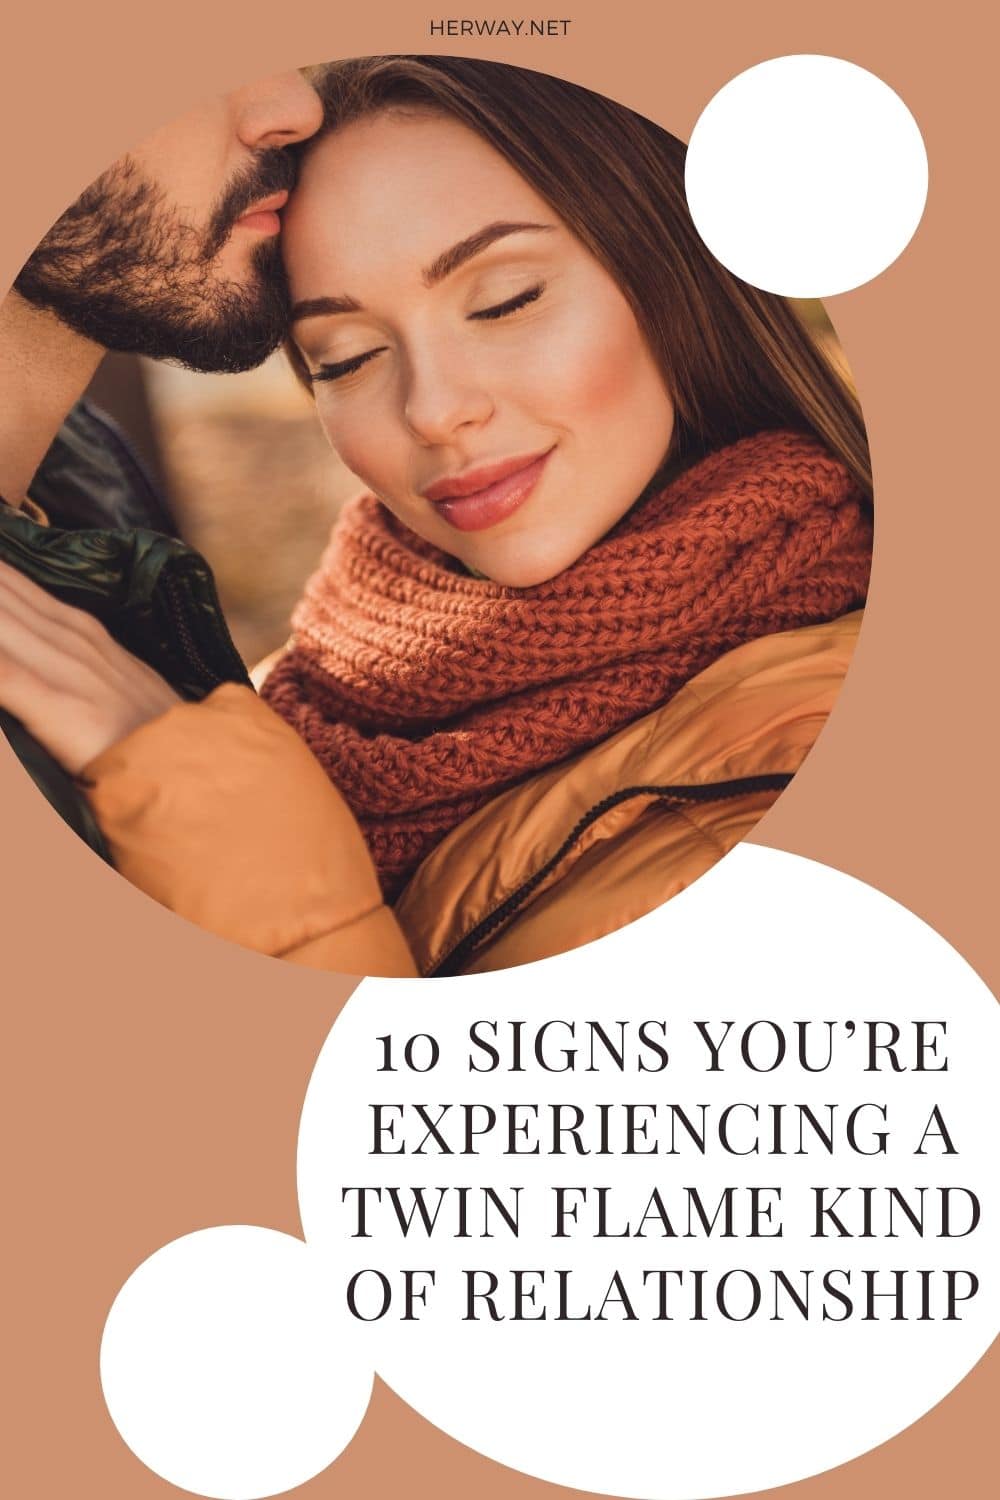 10 Signs You’re Experiencing A Twin Flame Kind Of Relationship